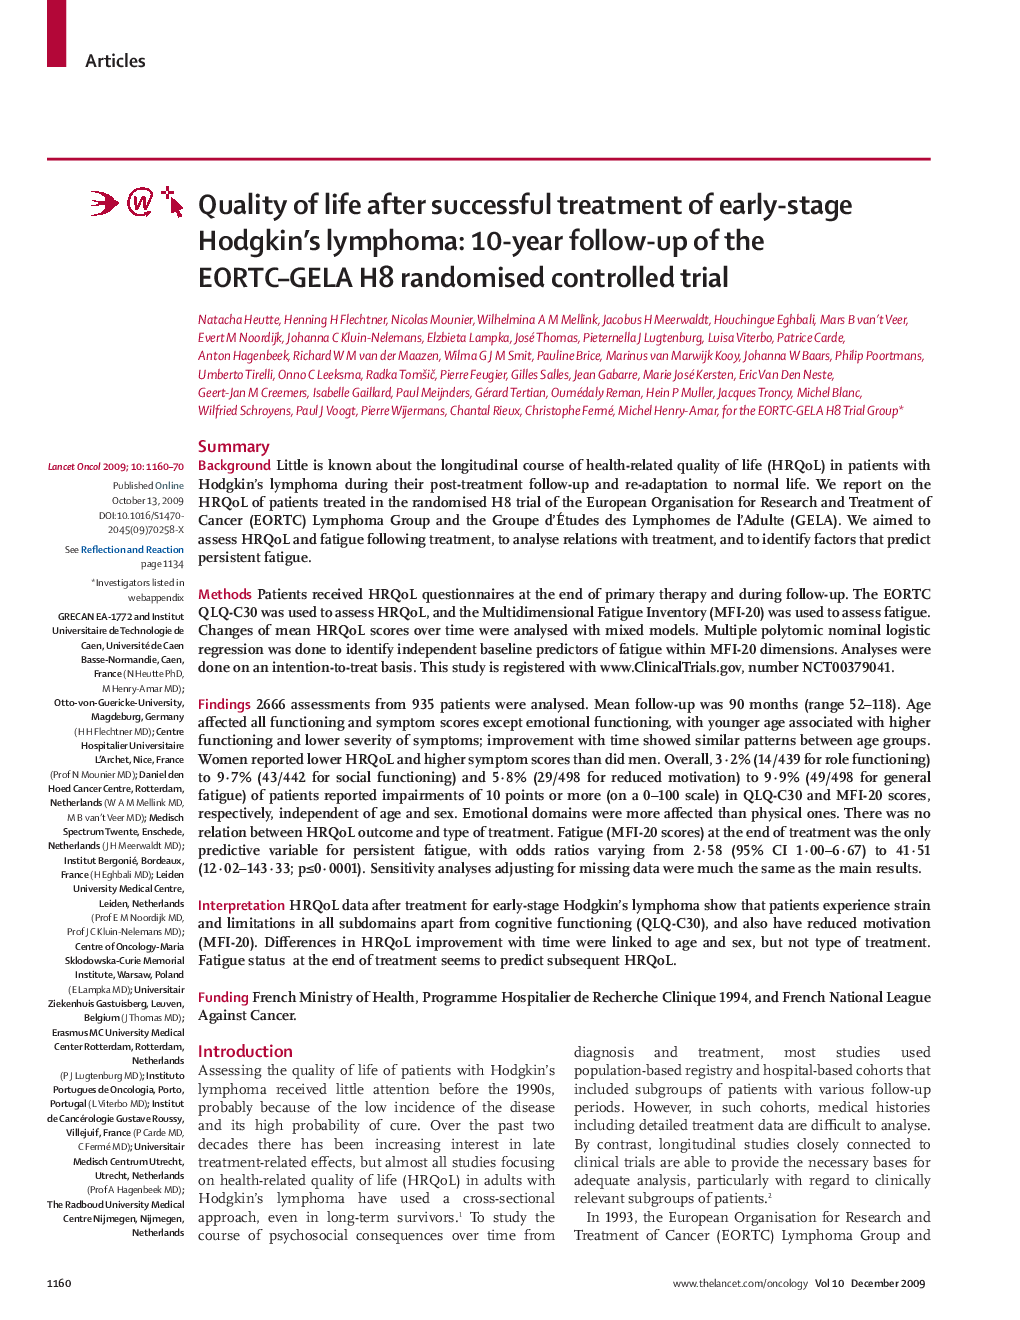 Quality of life after successful treatment of early-stage Hodgkin's lymphoma: 10-year follow-up of the EORTC–GELA H8 randomised controlled trial